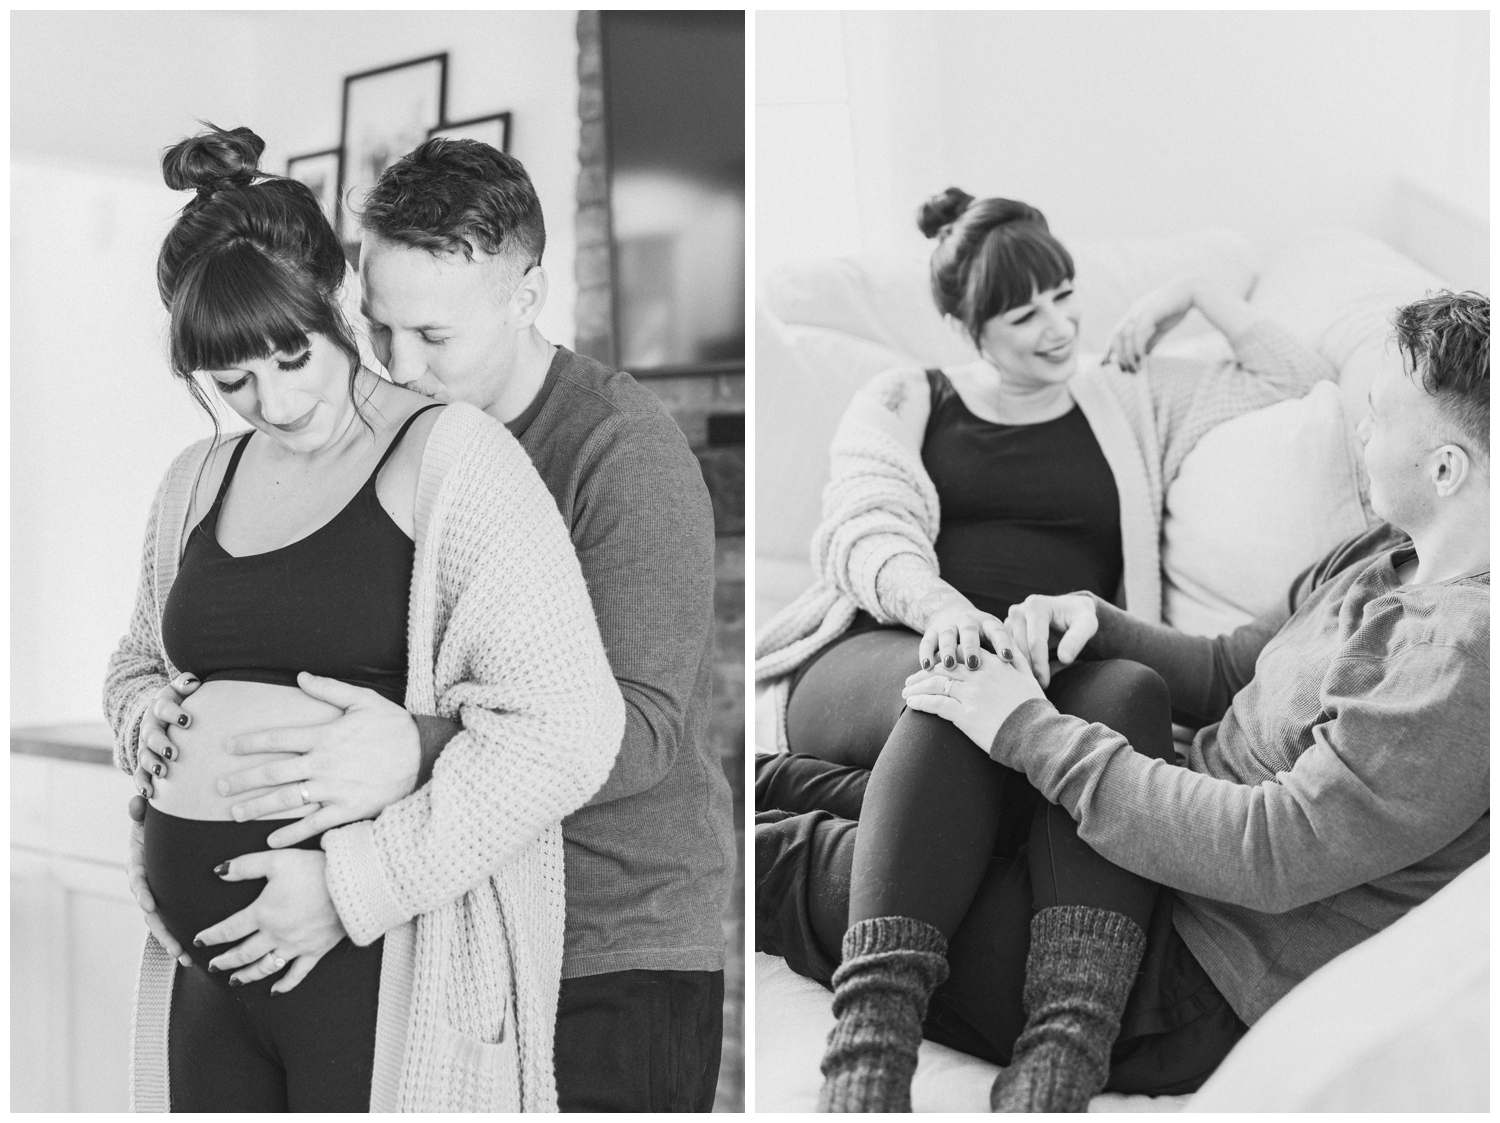 Black and white timeless images of a future Mom and Dad celebrating their pregnancy with cozy lifestyle maternity photos.